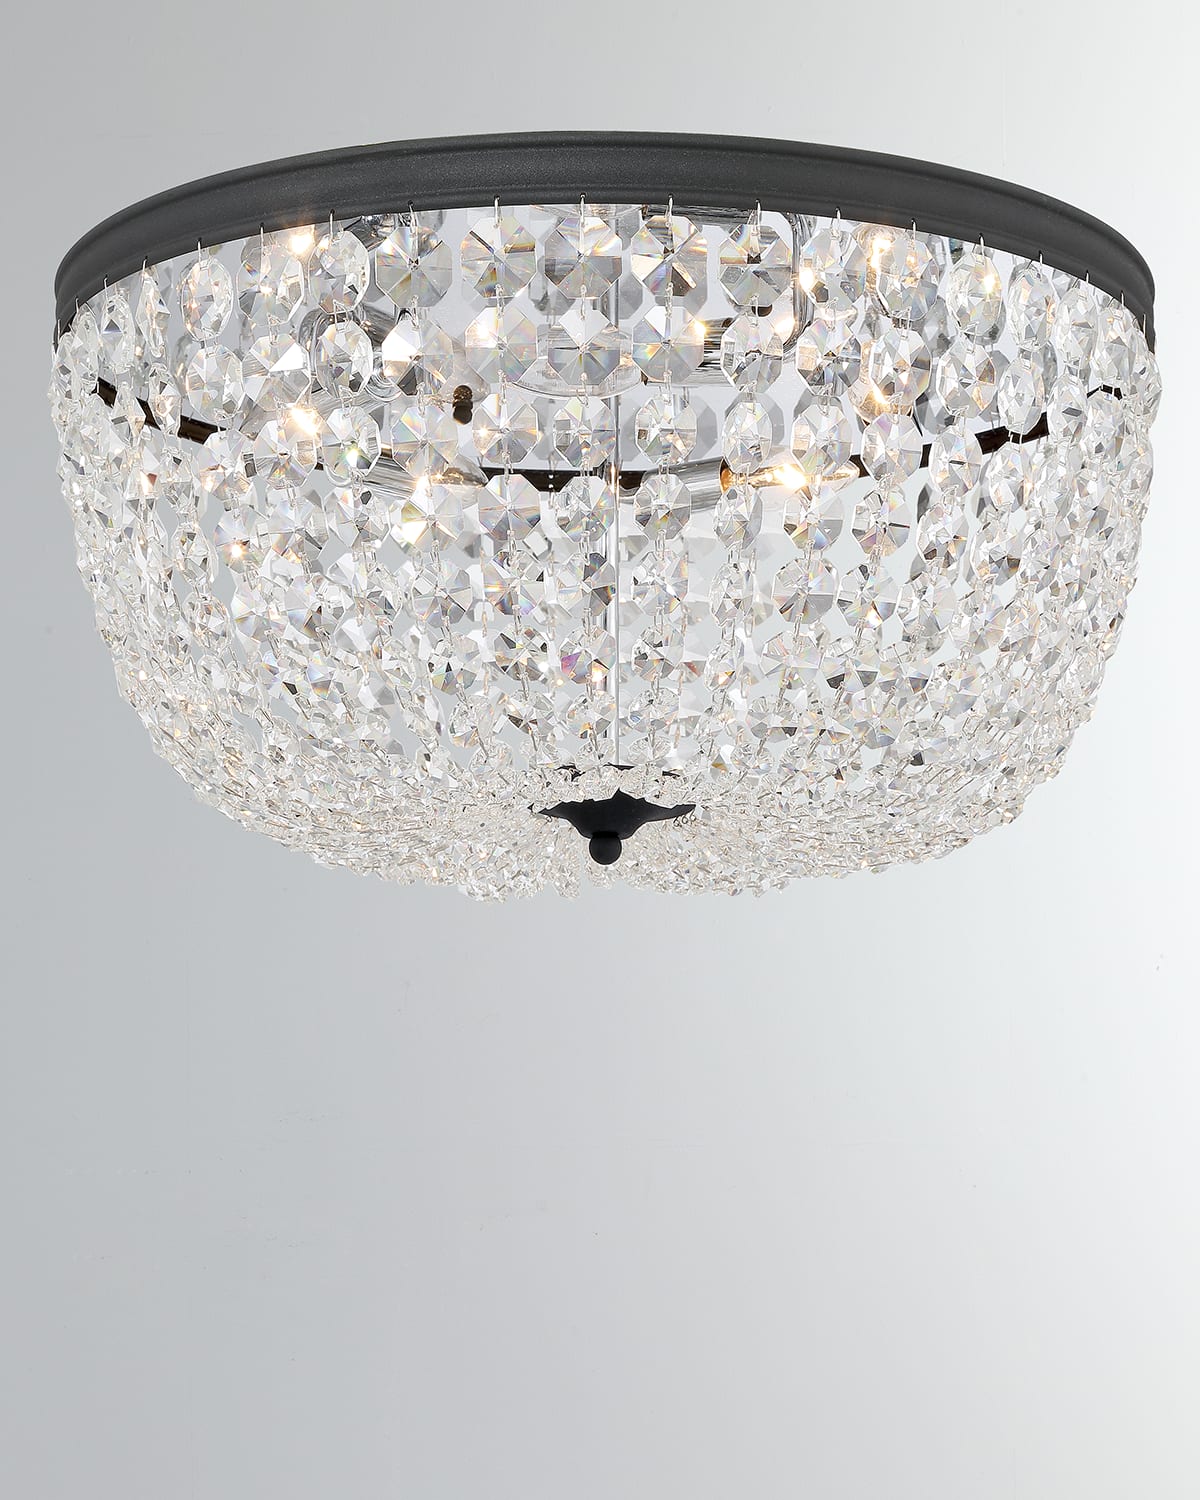 Crystorama Nola 5-light Forged Ceiling Mount In Chrome